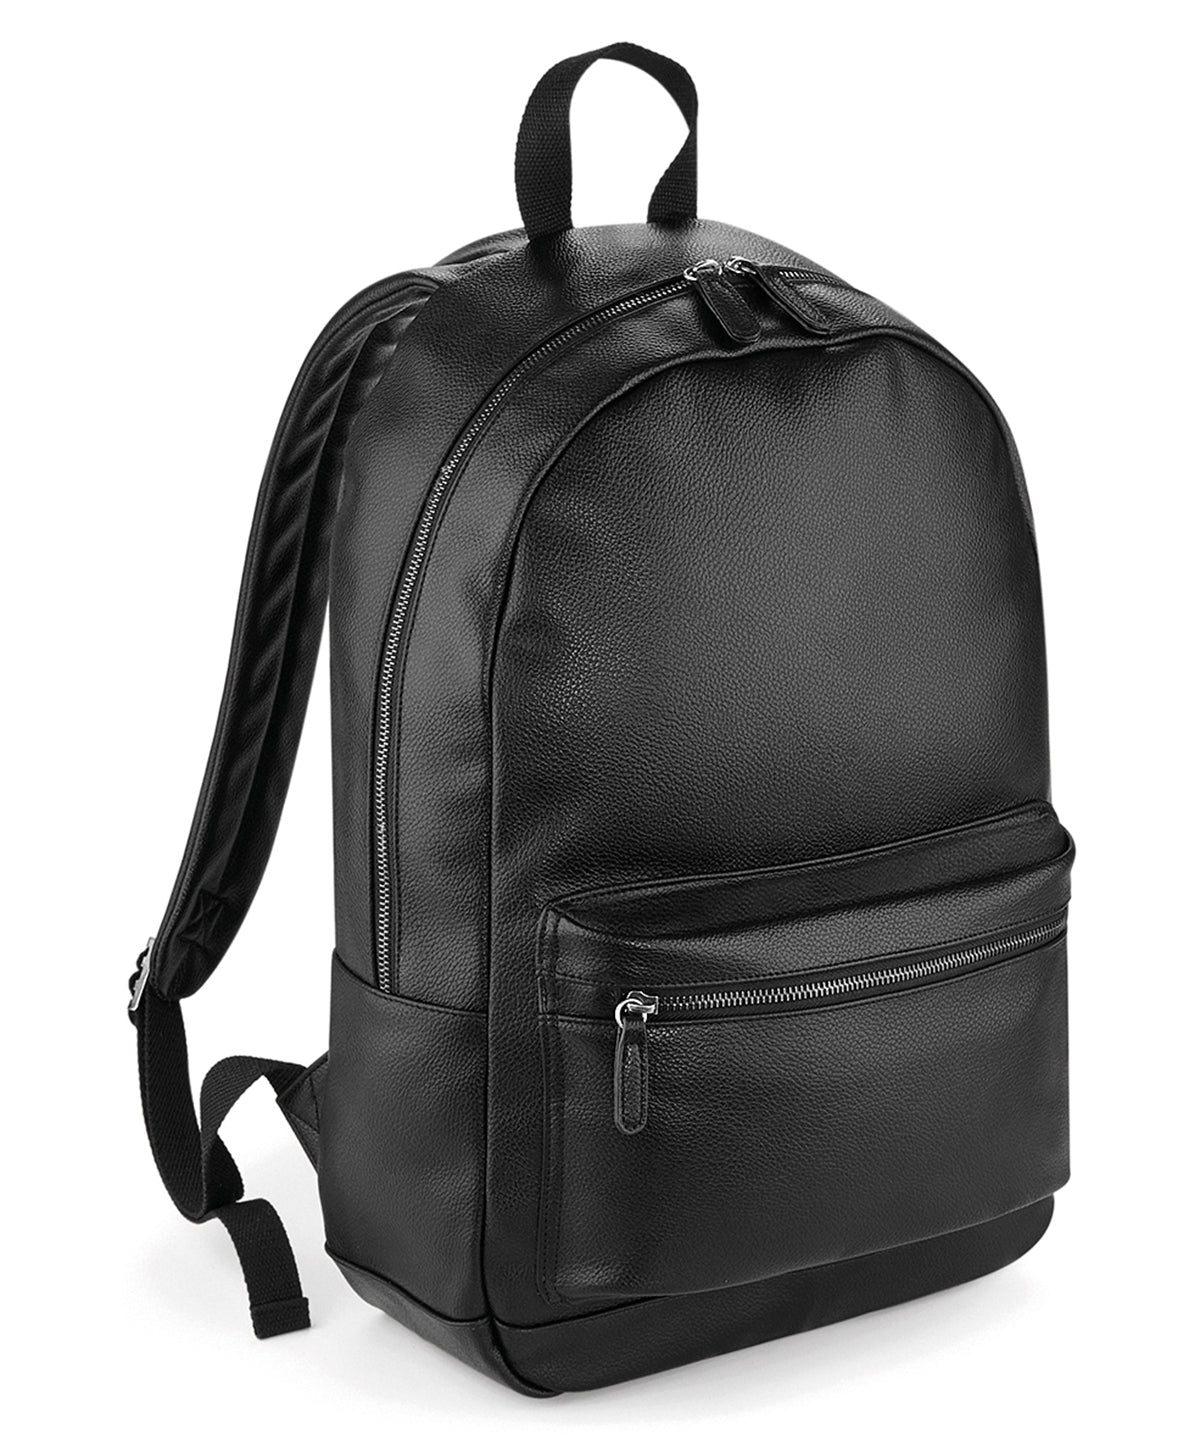 Töskur - Faux Leather Fashion Backpack